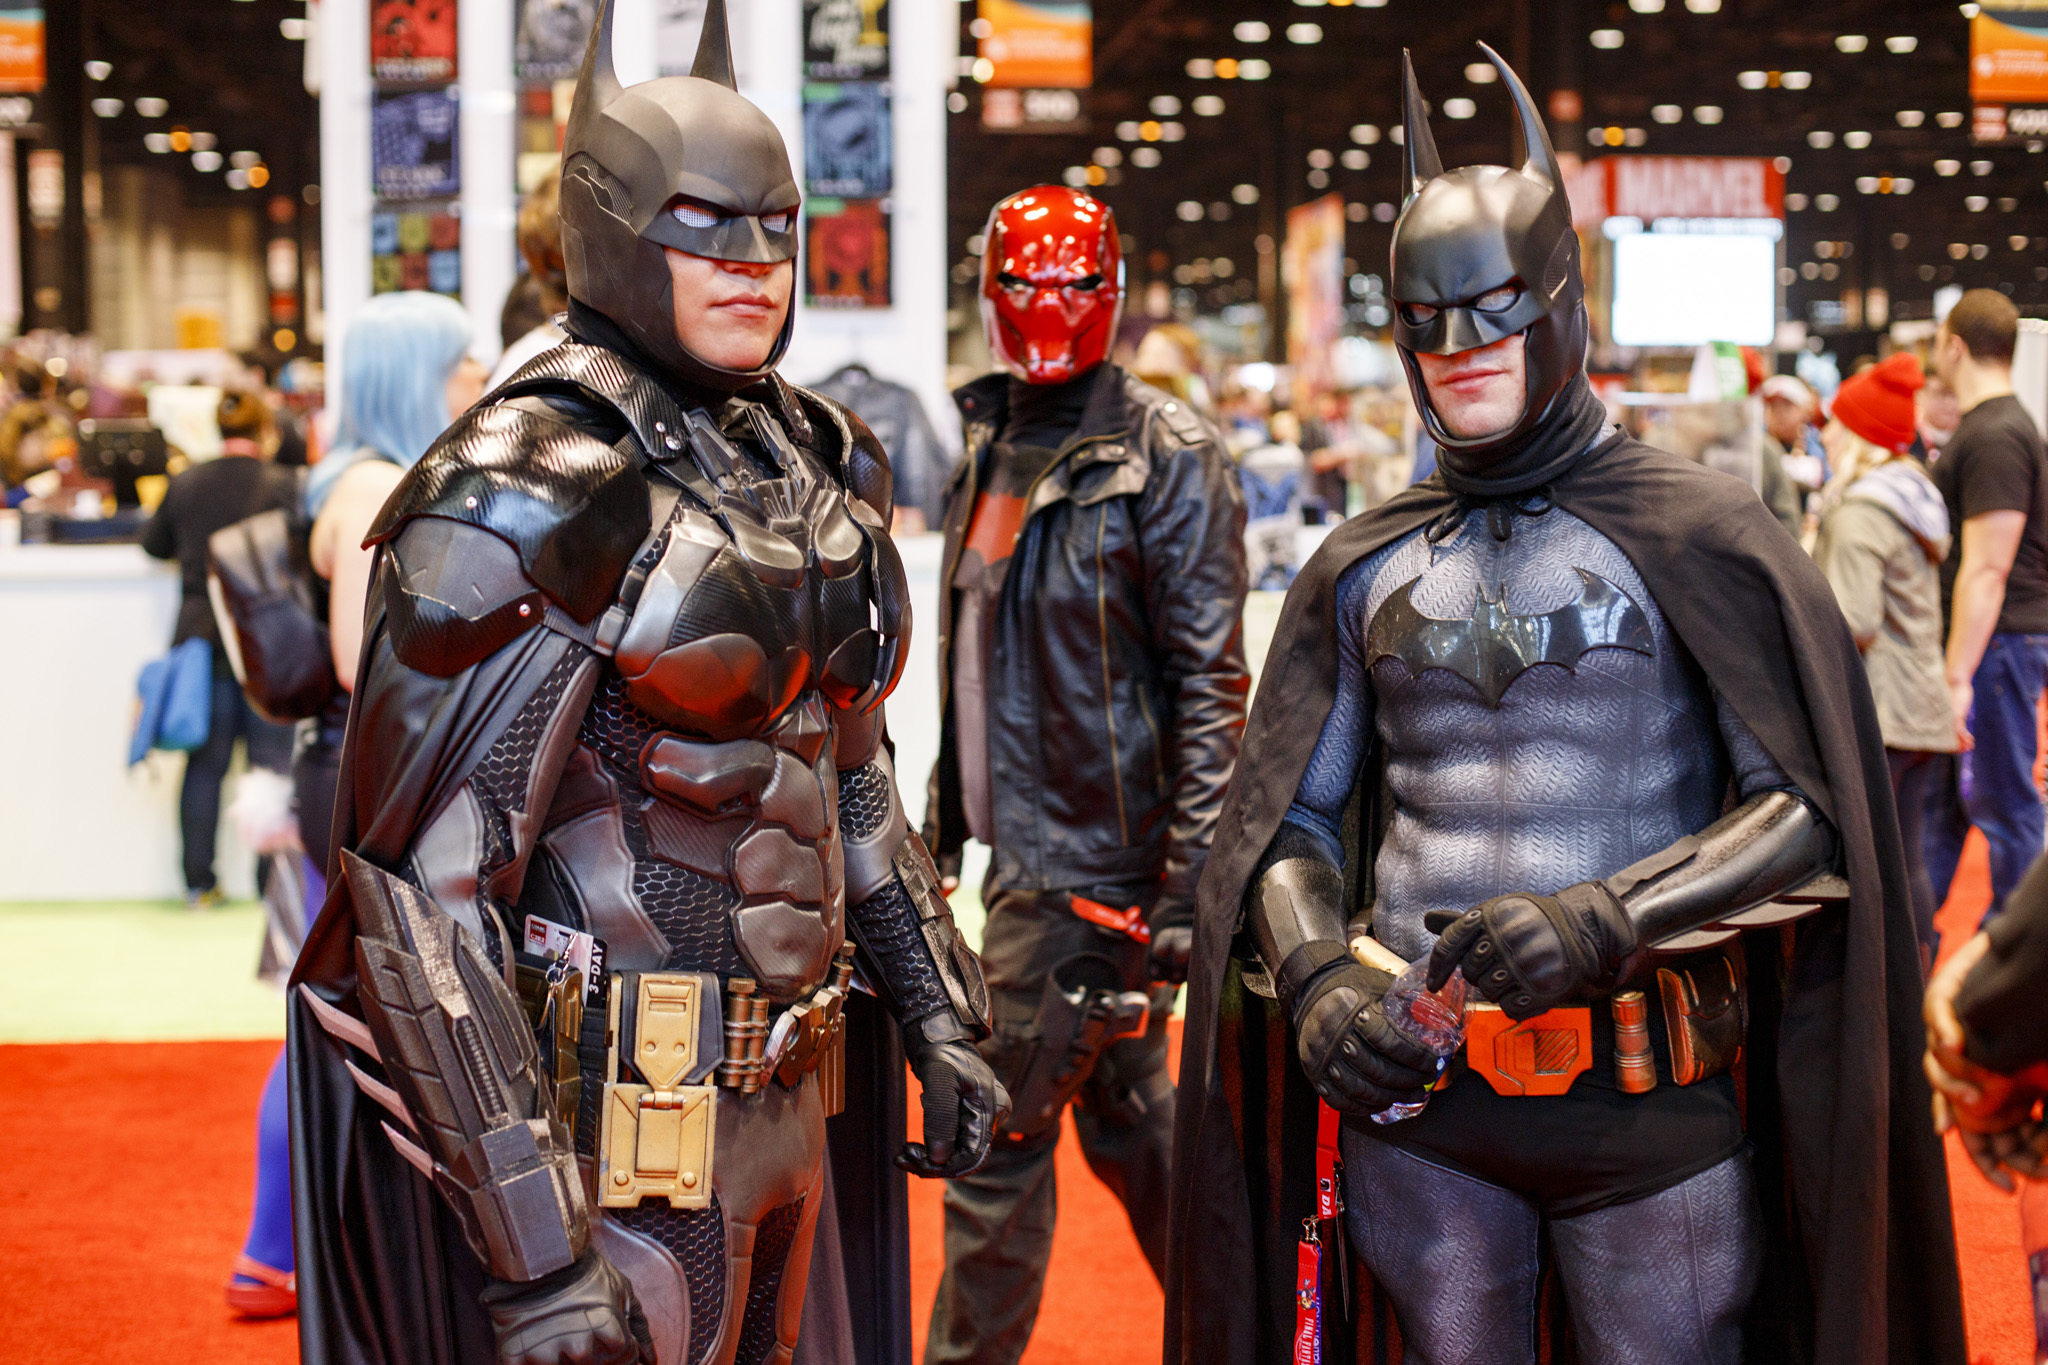 C2E2: Chicago Comic and Entertainment Expo | Things to do in Chicago